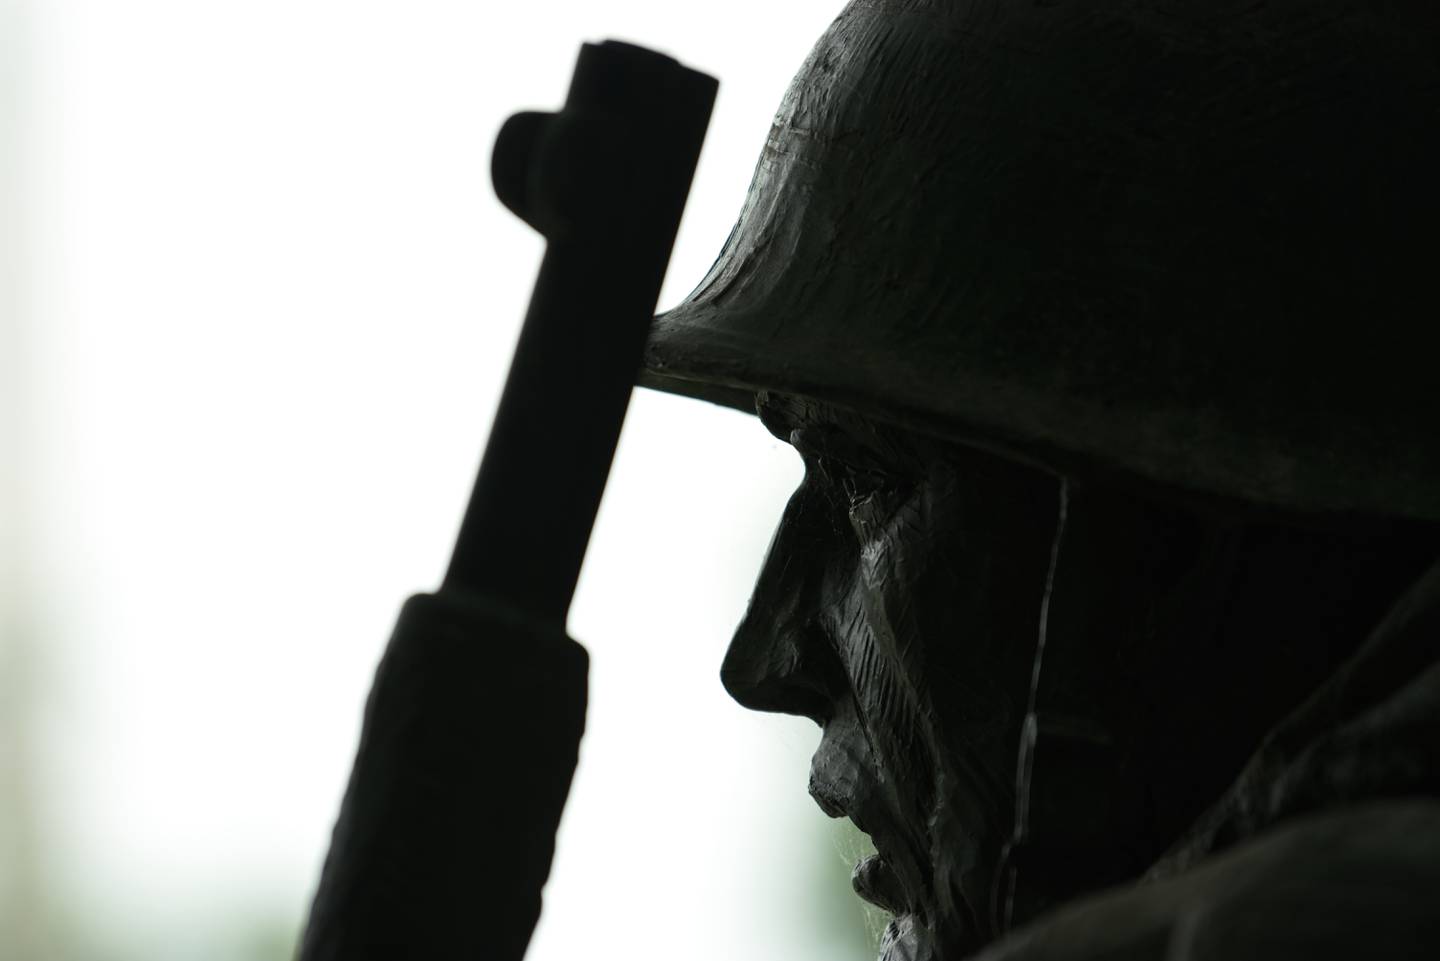 Nineteen troops with various guns and other gear are depicted in "On Patrol," stainless steel statues installed at the Korean War Veterans Memorial in Washington, D.C.